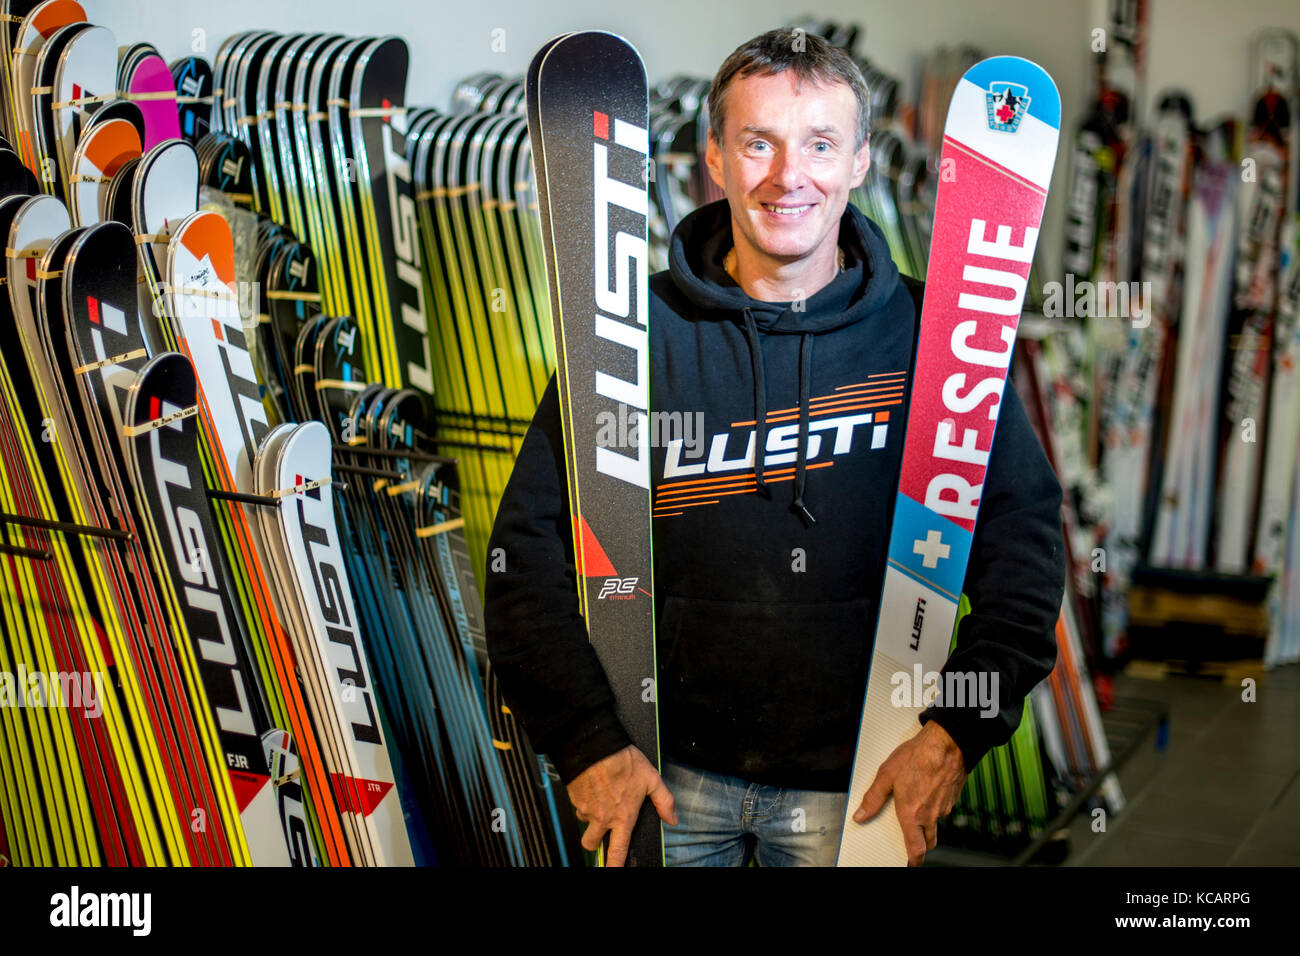 Czech company Lusti, which produces skis was founded in 1993 and initially  specialized in international market. Since 2000 the company began to  produce skis for the Czech market under the brand Lusti.